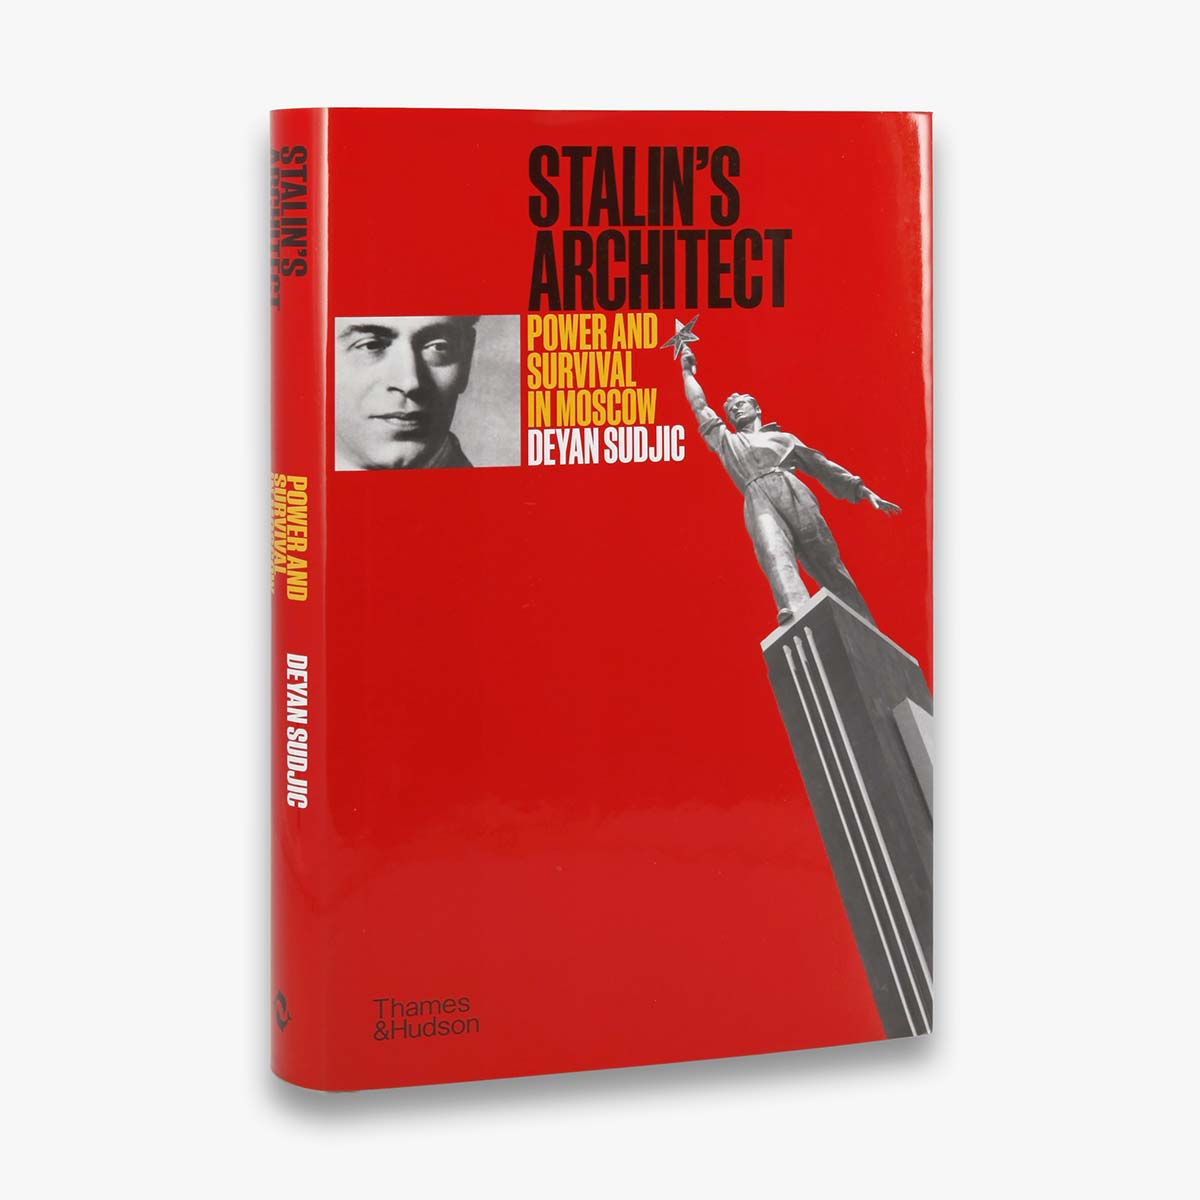 Stalin's Architect - Power and Survival in Moscow by Deyan Sudjic